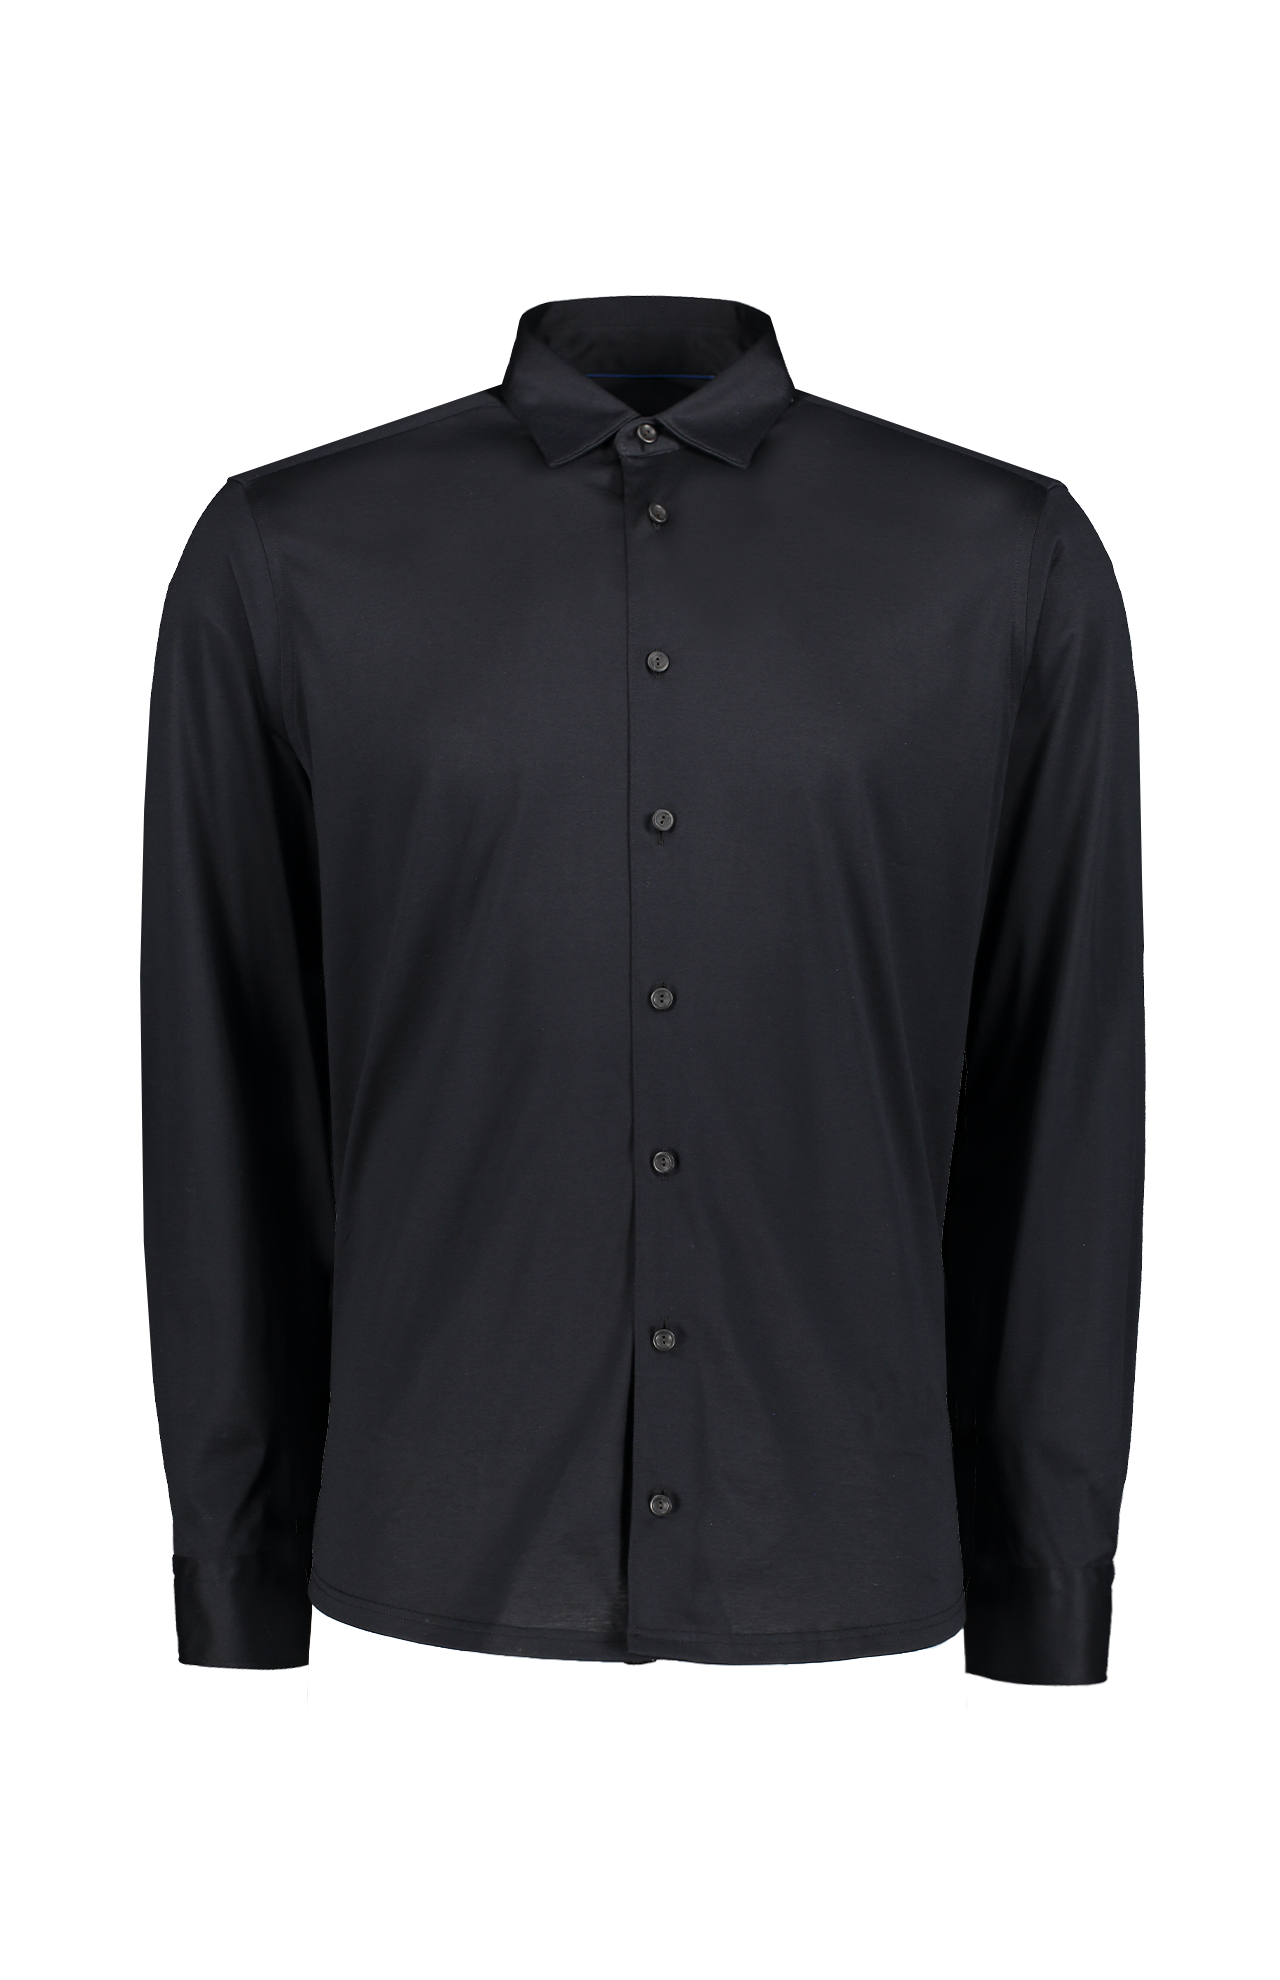 Eton Jersey Contemporary Shirt in Black - Front Mannequin Image(6919758315635)